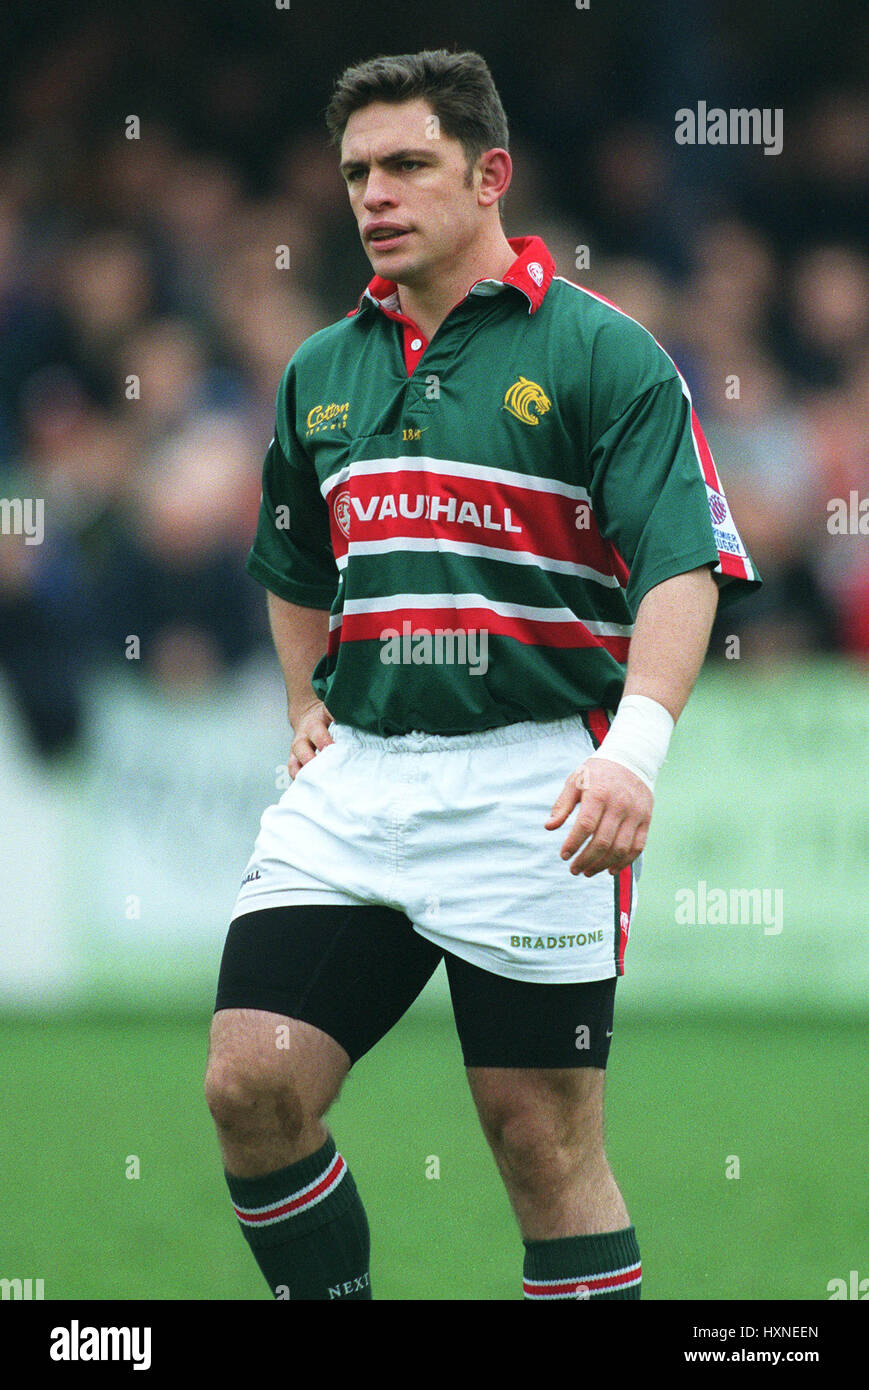 ROD KAFER Leicester Tigers RU HEYWOOD ROAD MANCHESTER VENTE 17 Novembre 2001 Banque D'Images